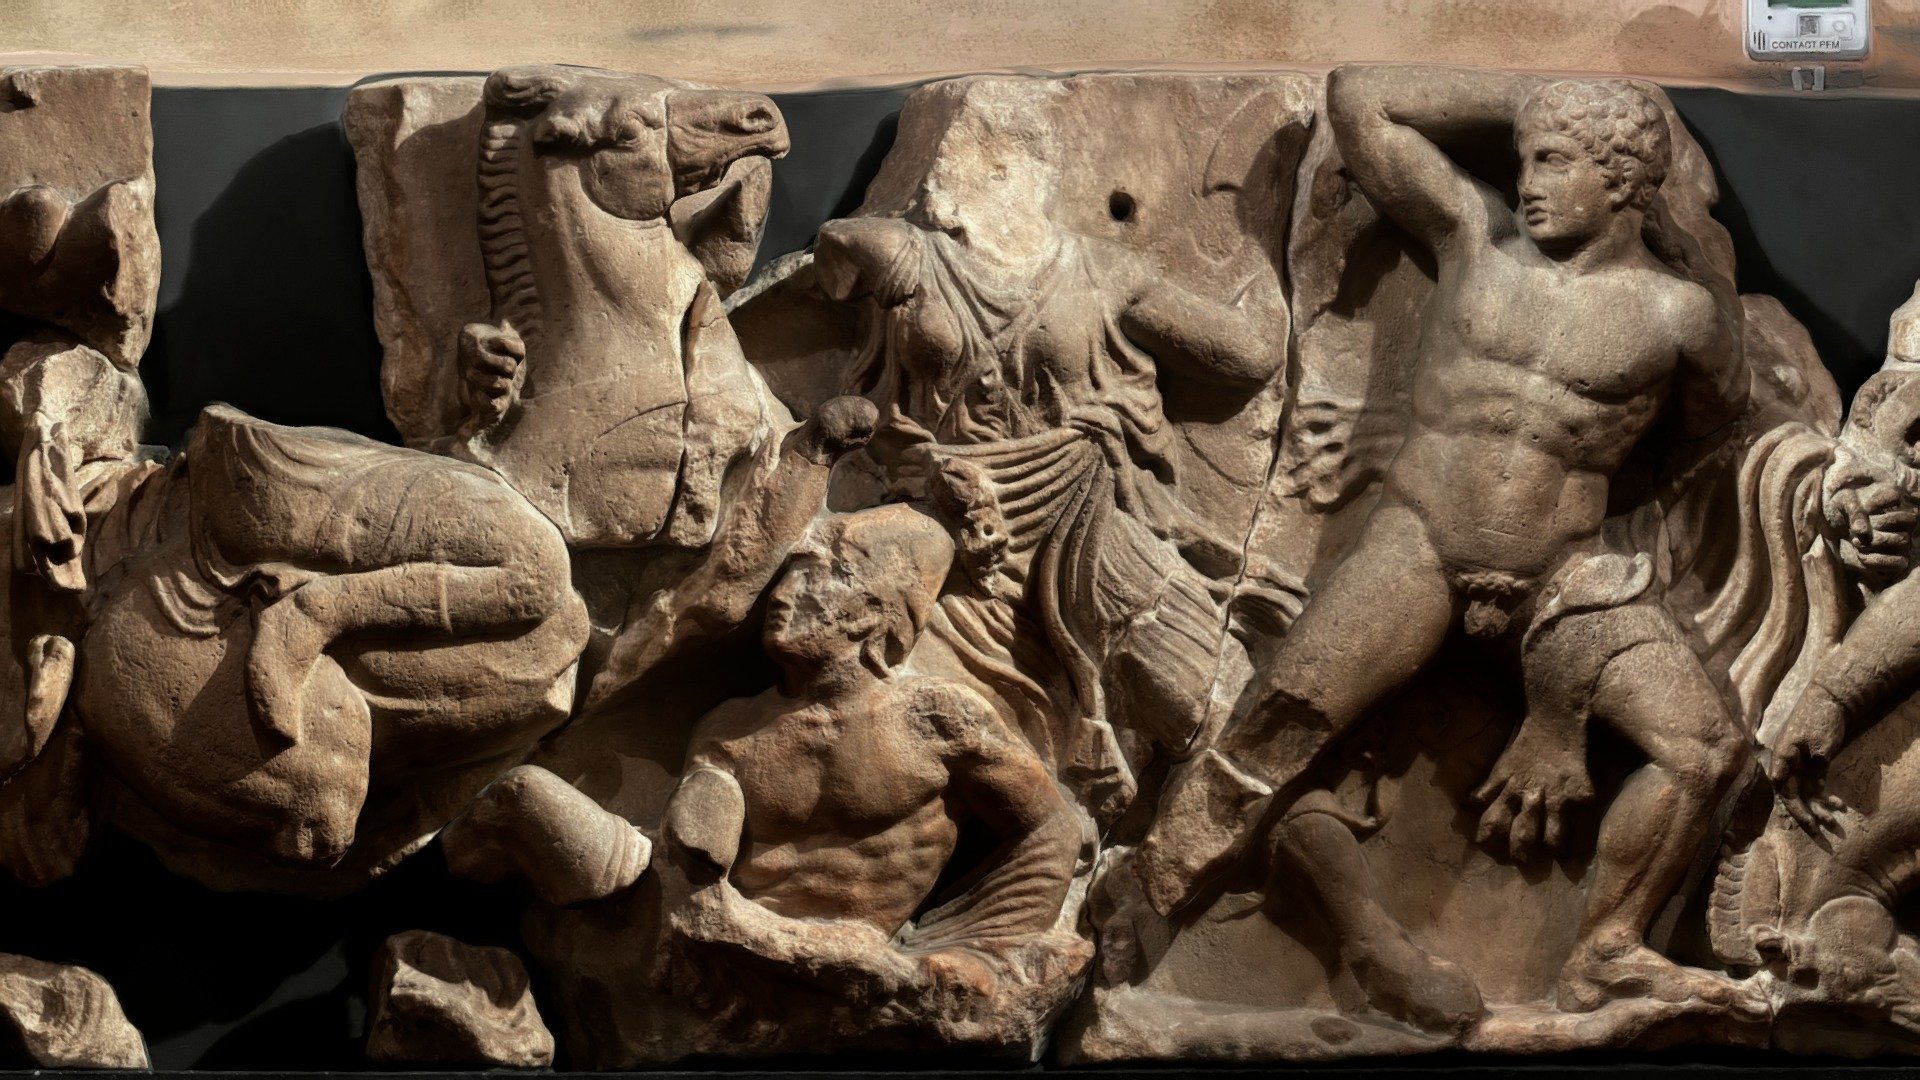 The Bassae Frieze in the British Museum
Material    marble
Size    31 × 0.63 m
Created 420–400 BCE

Discovered  1811–1812 by a group including Cockerell, Haller, Linkh, Foster, Legh, Gropius, Baron von Stackelberg, Peter Brondsted
Present location    British Museum, London
Identification  1815,1020.2; 1815,1020.7; 1815,1020.11 etc

The Bassae Frieze is the high relief marble sculpture in 23 panels, 31 m long by 0.63 m high, made to decorate the interior of the cella of the Temple of Apollo Epikourios at Bassae. It was discovered in 1811 by Carl Haller and Charles Cockerell, and excavated the following year by an expedition of the Society of Travellers led by Haller and Otto von Stackelberg. This team cleared the temple site in an endeavour to recover the sculpture, and in the process revealed it was part of the larger sculptural programme of the temple including the metopes of an external Doric frieze and an over-life-size statue.
(wikipedia) - The Bassae Frieze - Greeks fighting Amazons - 3D model by joshtonies 3d model